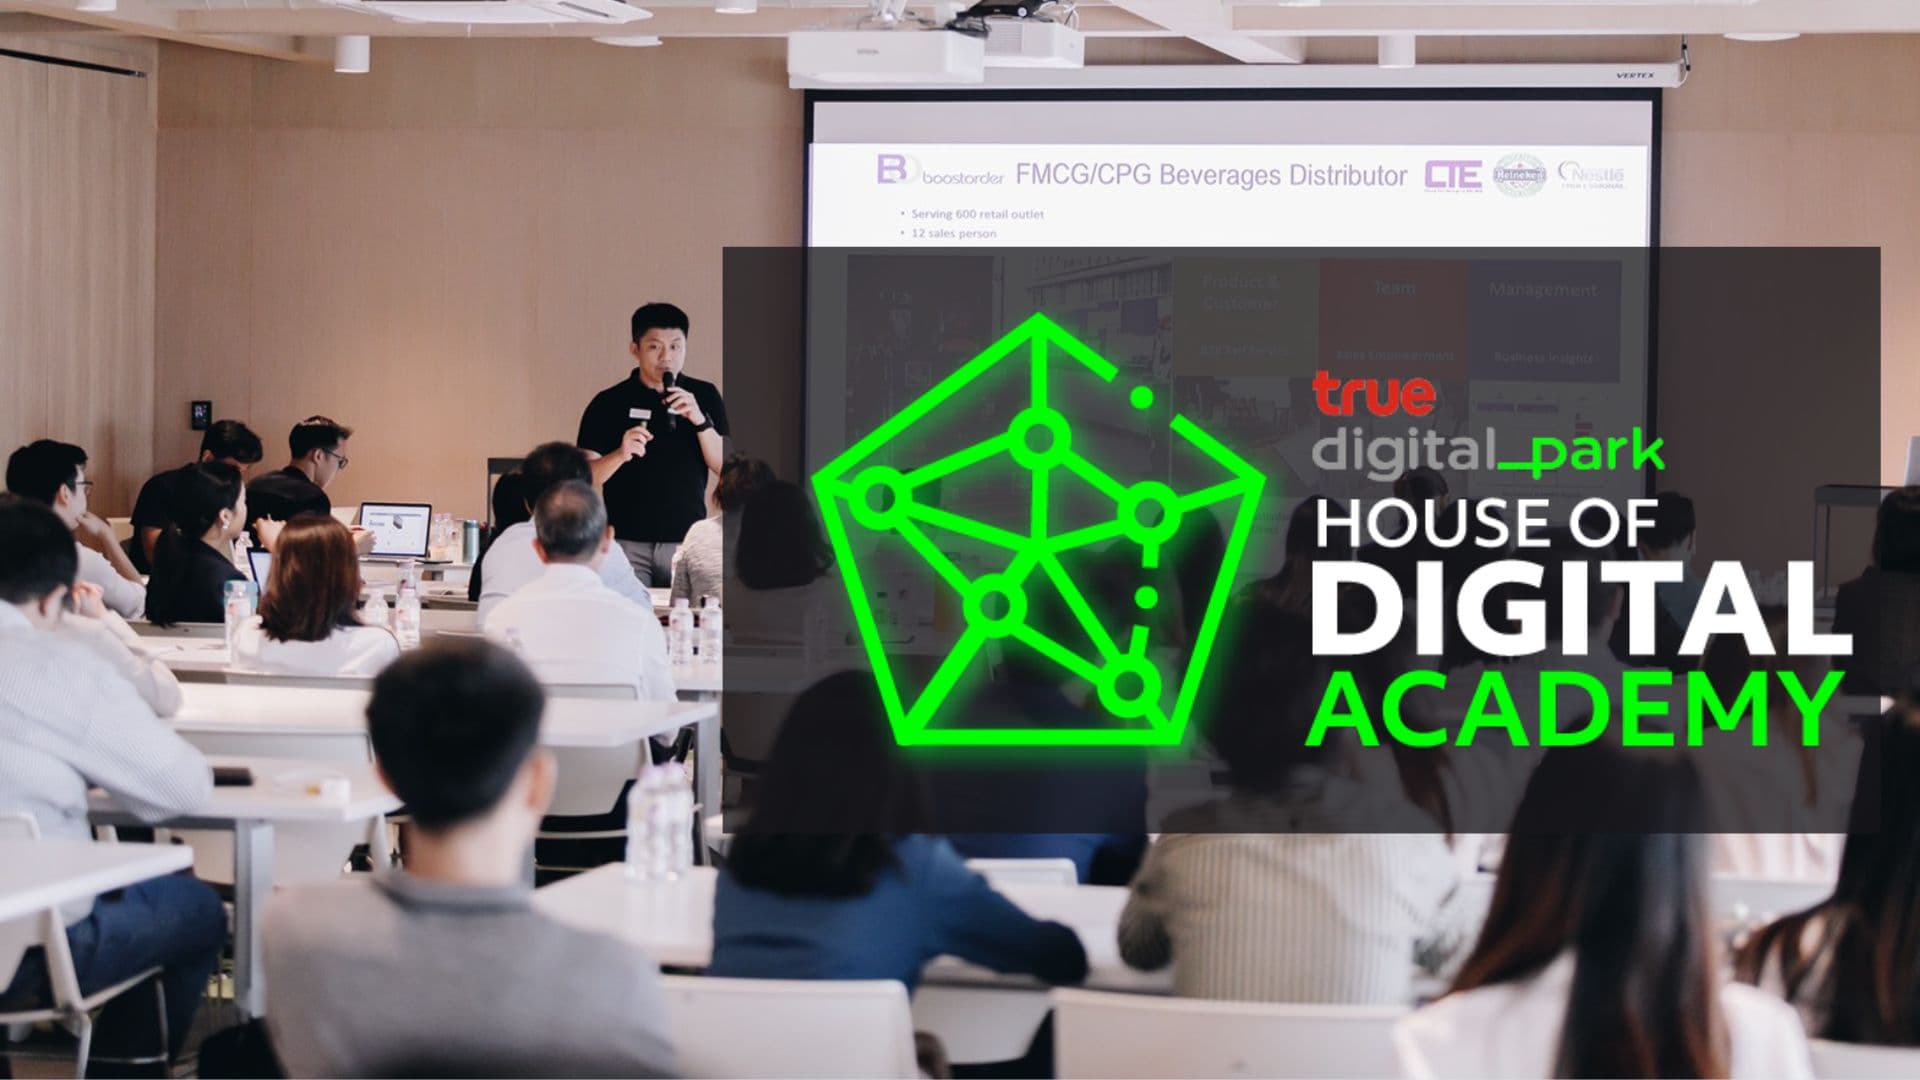 Microsoft and House of Digital Academy offering 11 free couses